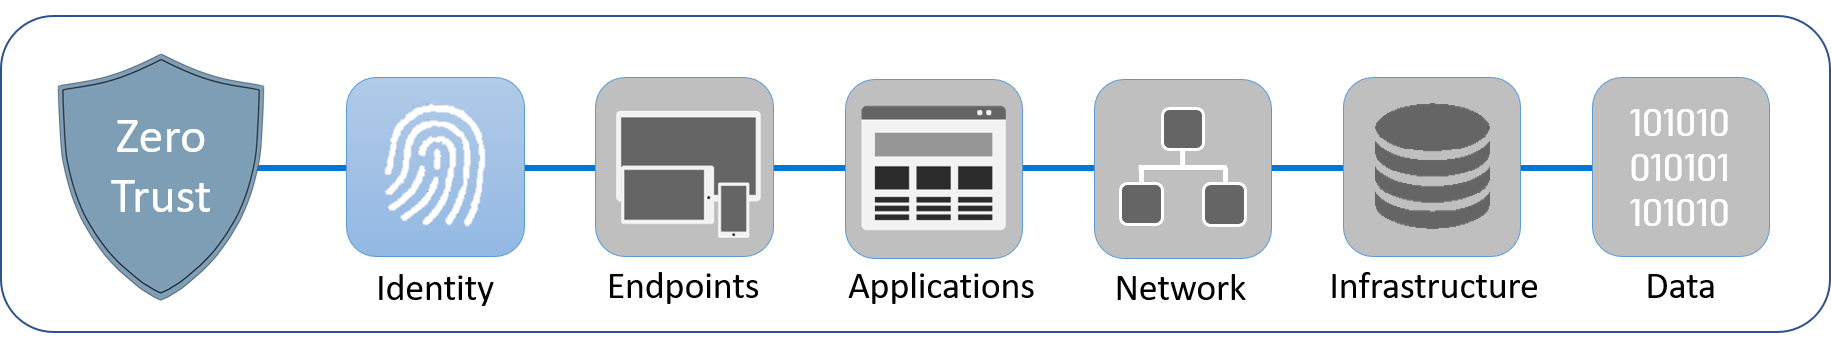 Diagram showing the six pillars that comprise Zero Trust: identity, endpoints, applications, networks, infrastructure, and data. Identity is highlighted.